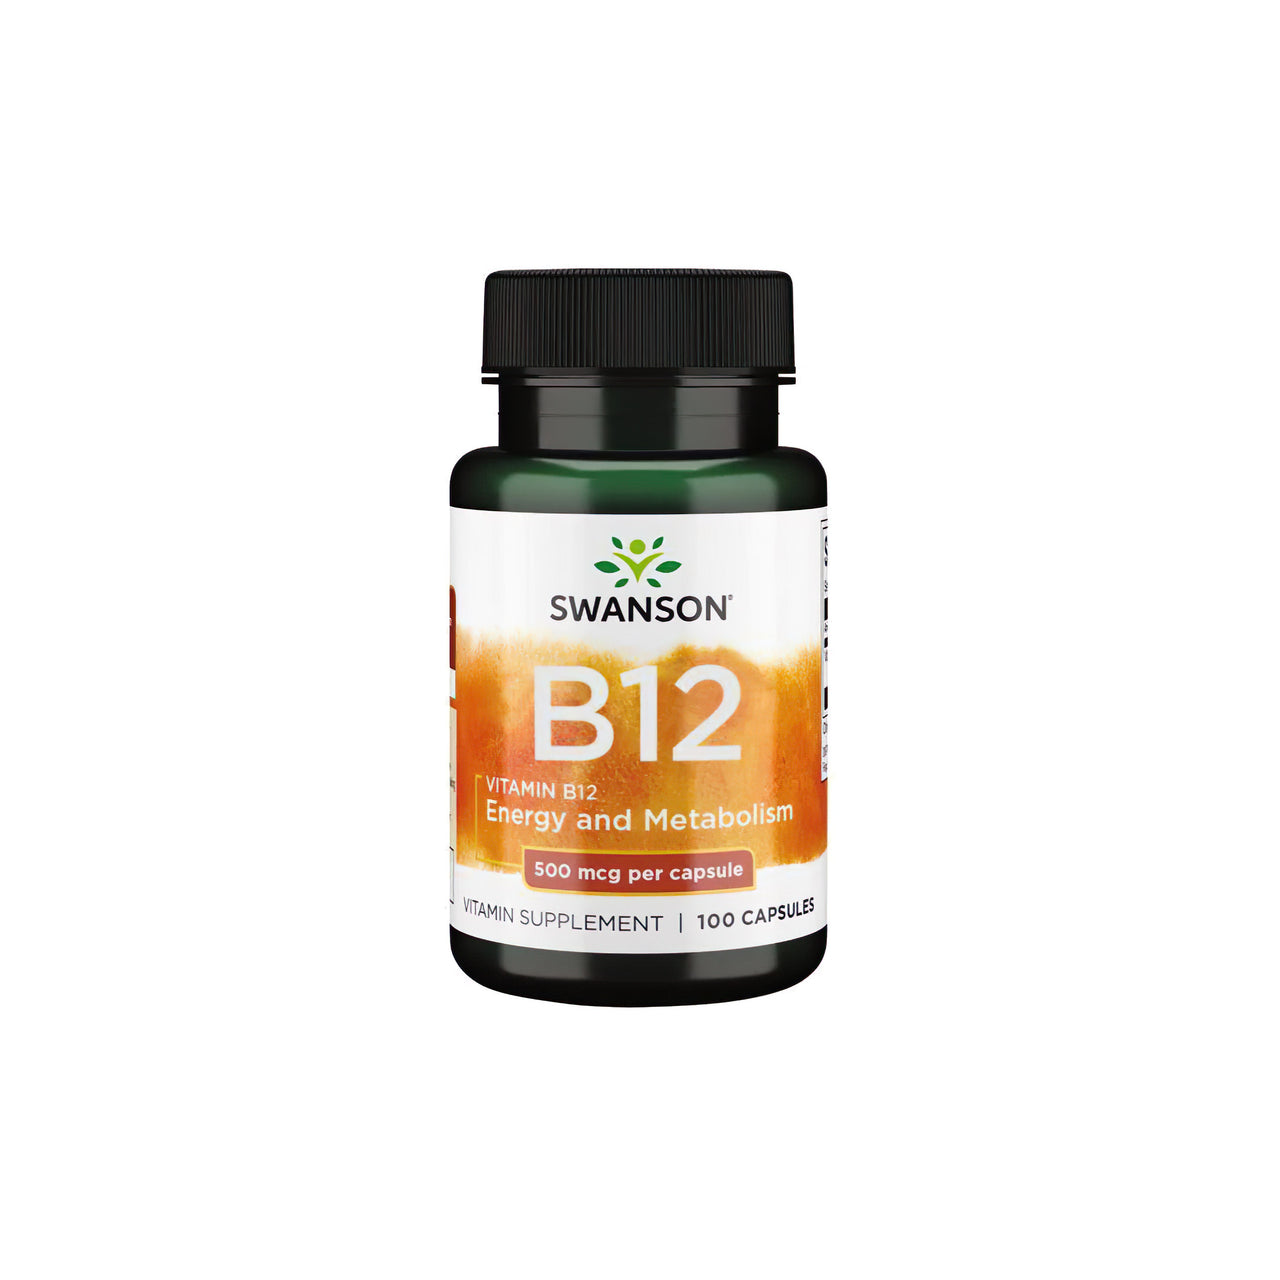 A bottle of Swanson Vitamin B-12 500 mcg 100 caps cyanocobalamin supplement for red blood cell production and cardiovascular health.